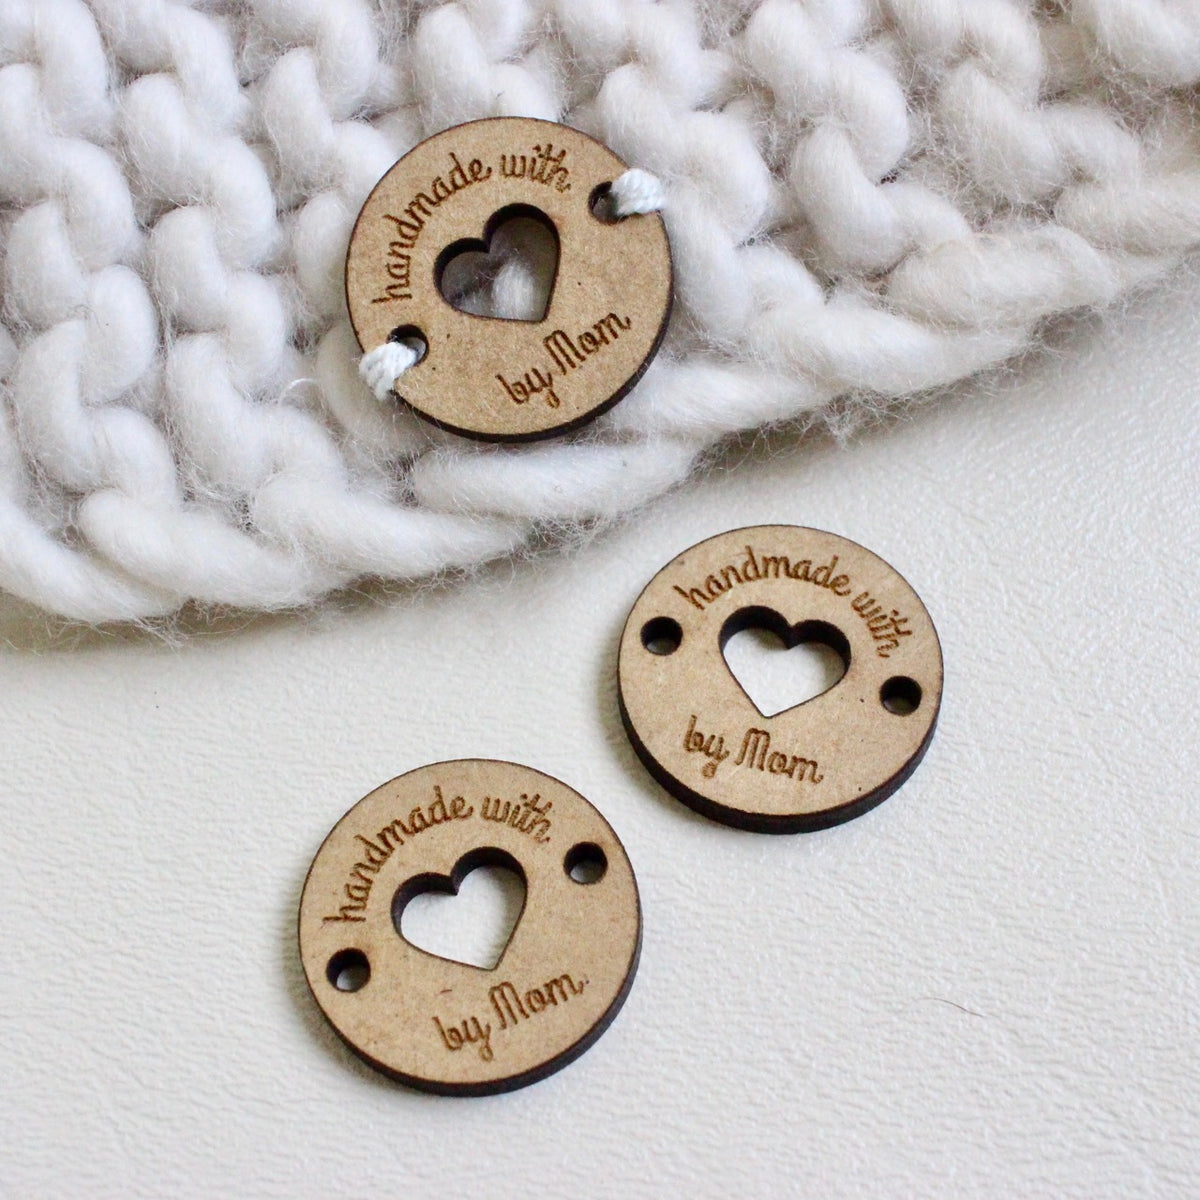 9 X 20mm HANDMADE WITH LOVE 'knitted' Wooden Buttons, Knitted Handmade With Love  Buttons, Wooden Hand Knitted Buttons. 